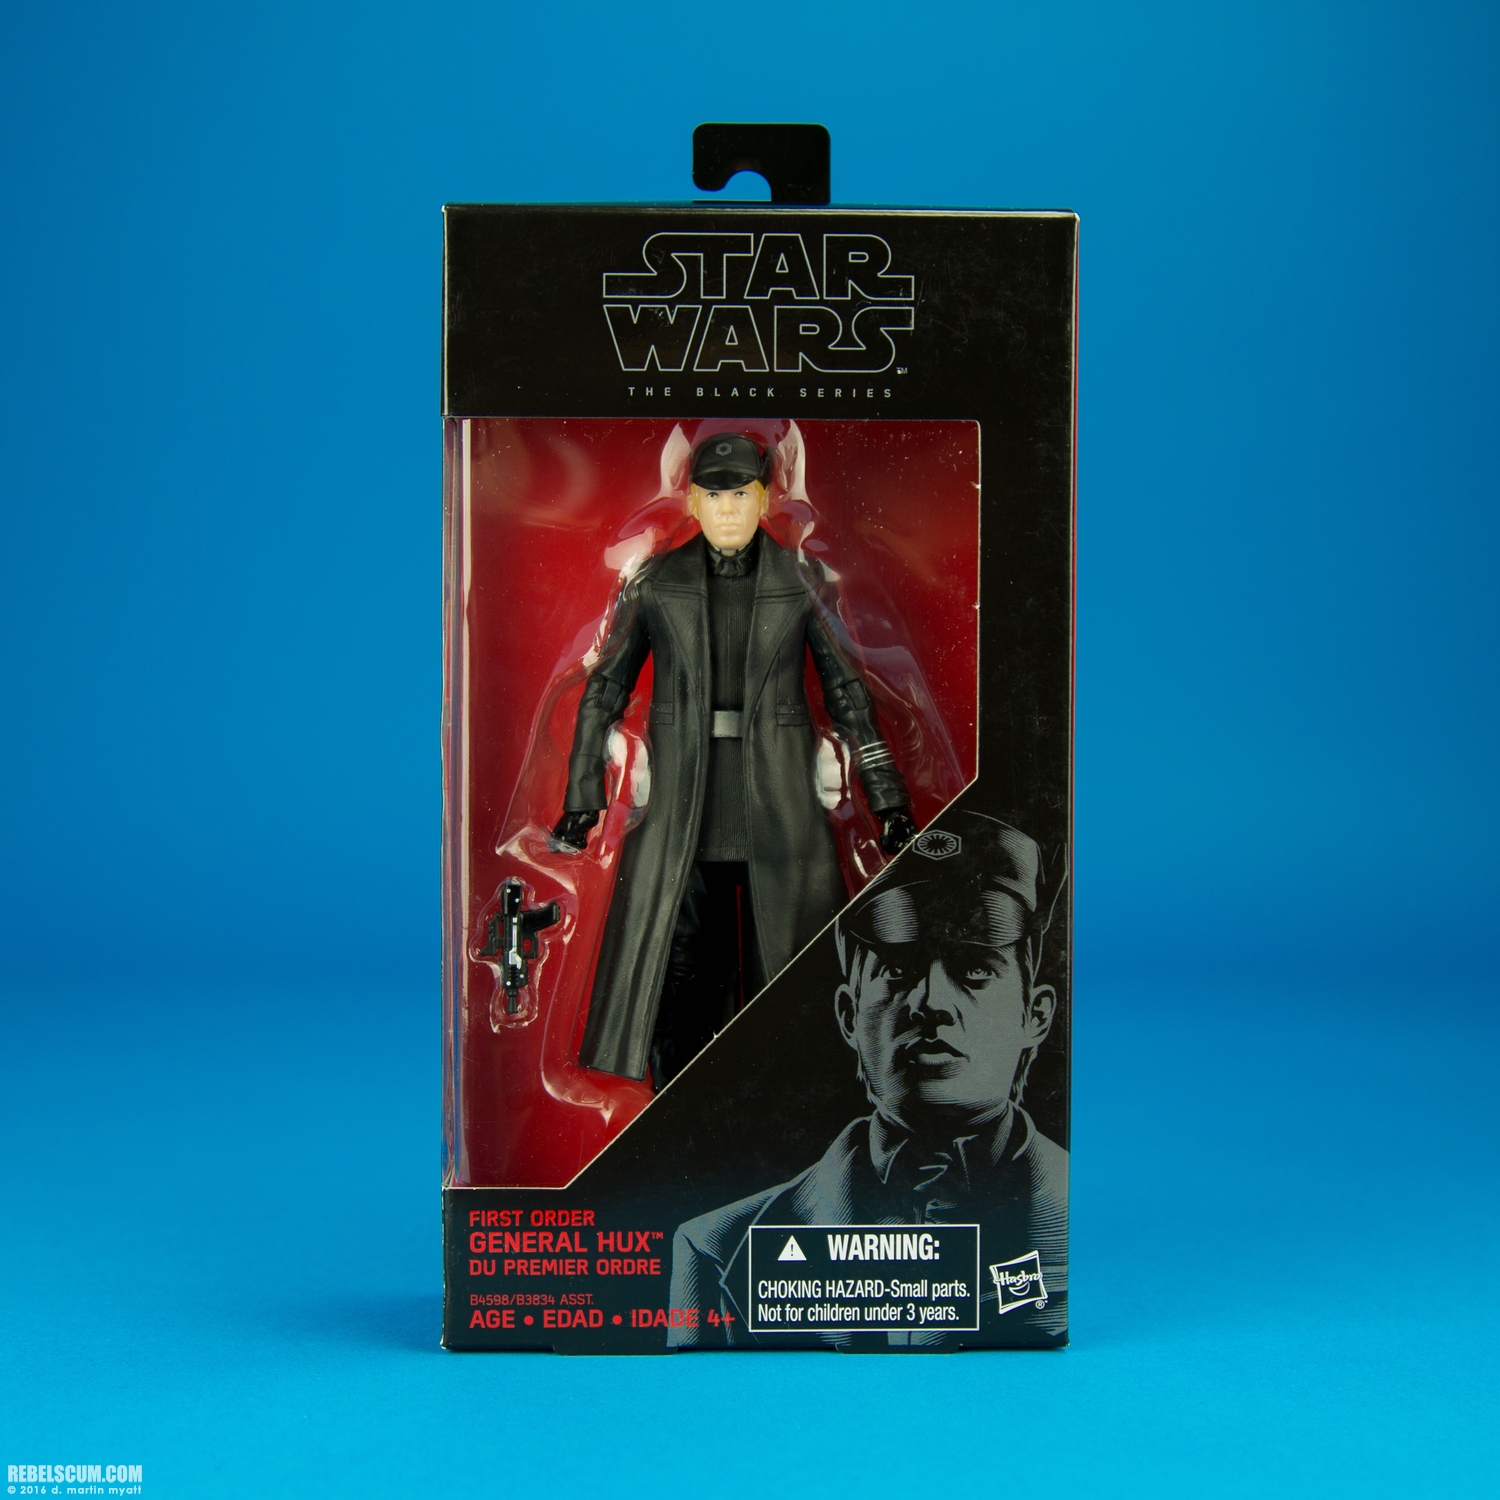 First-Order-General-Hux-13-The-Black-Series-6-inch-013.jpg